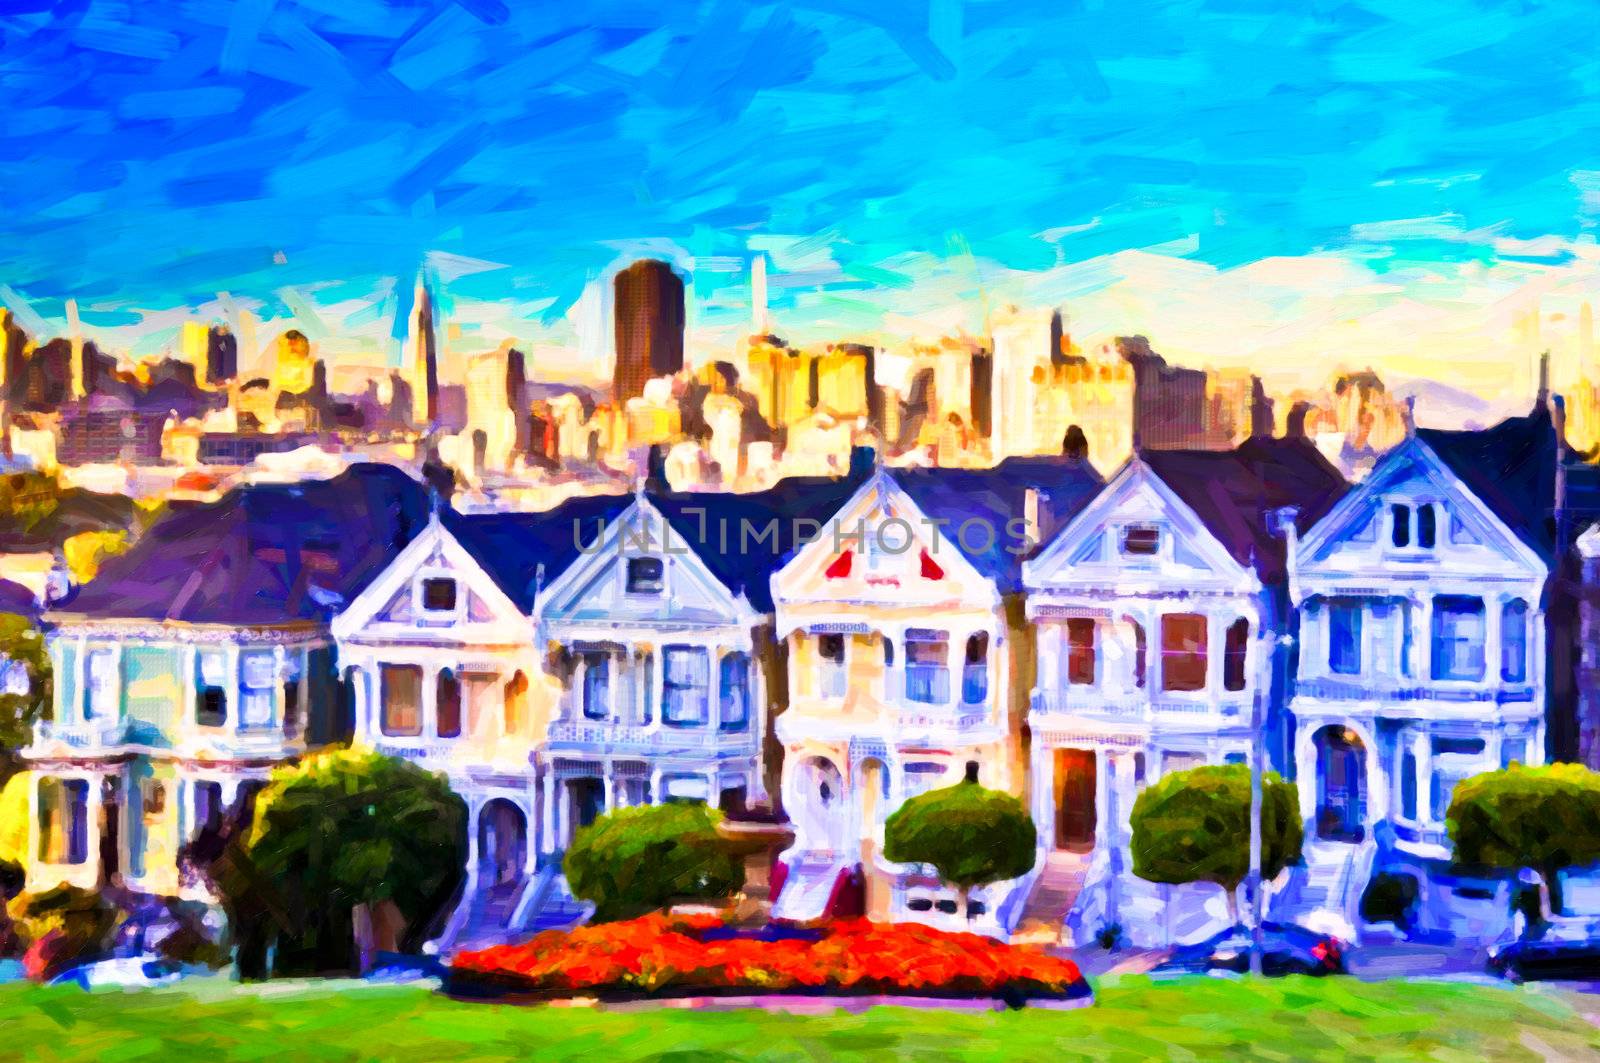 Victorian houses in San Francisco, post process painting art, SF, USA